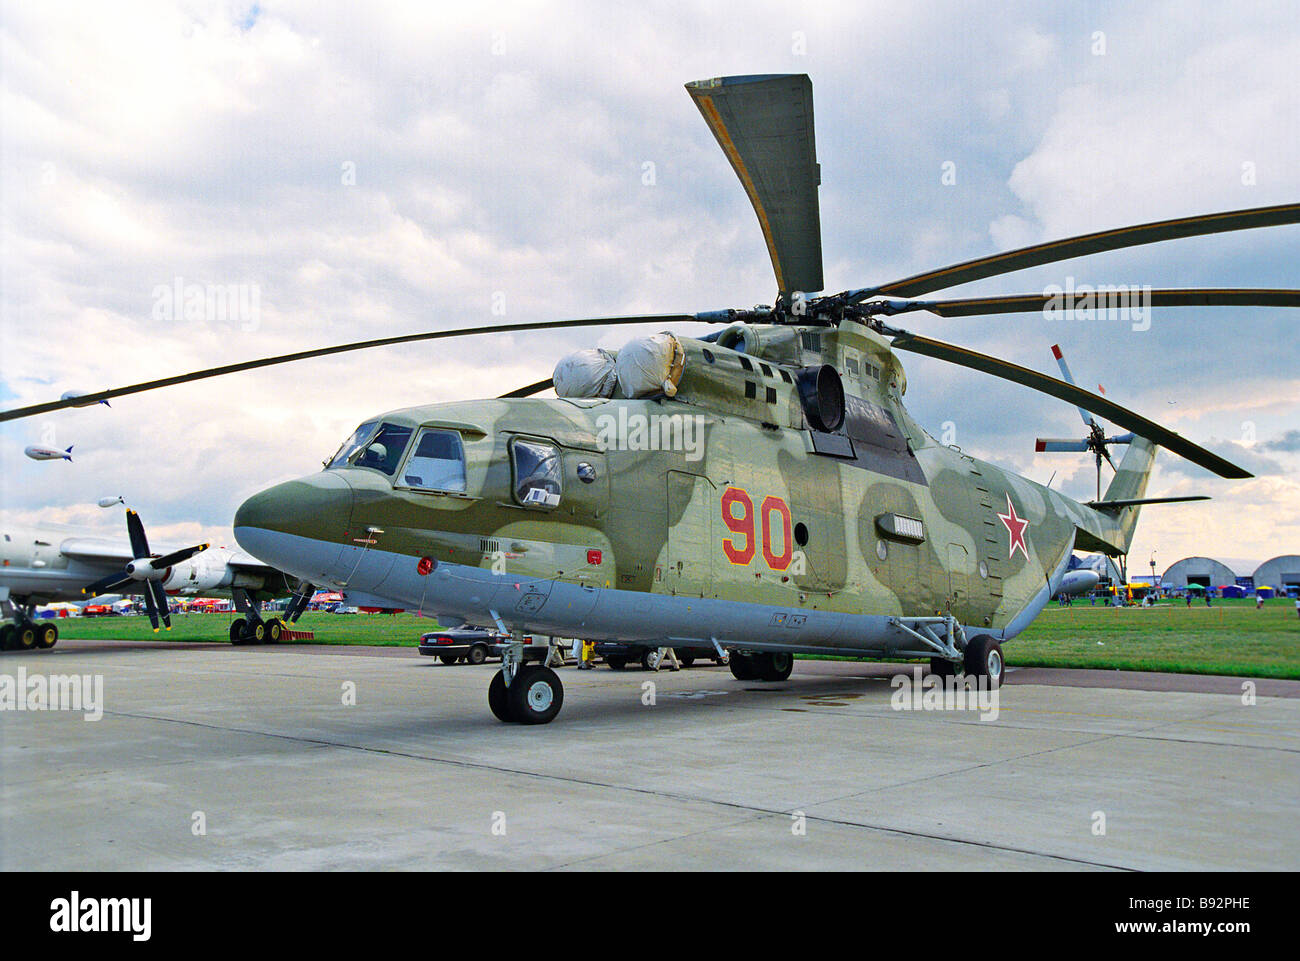 A MI 26 jumbo cargo helicopter of Russian design and manufacture at the 6th  international aerospace show MAKS 2003 in Zhukovsky Stock Photo - Alamy